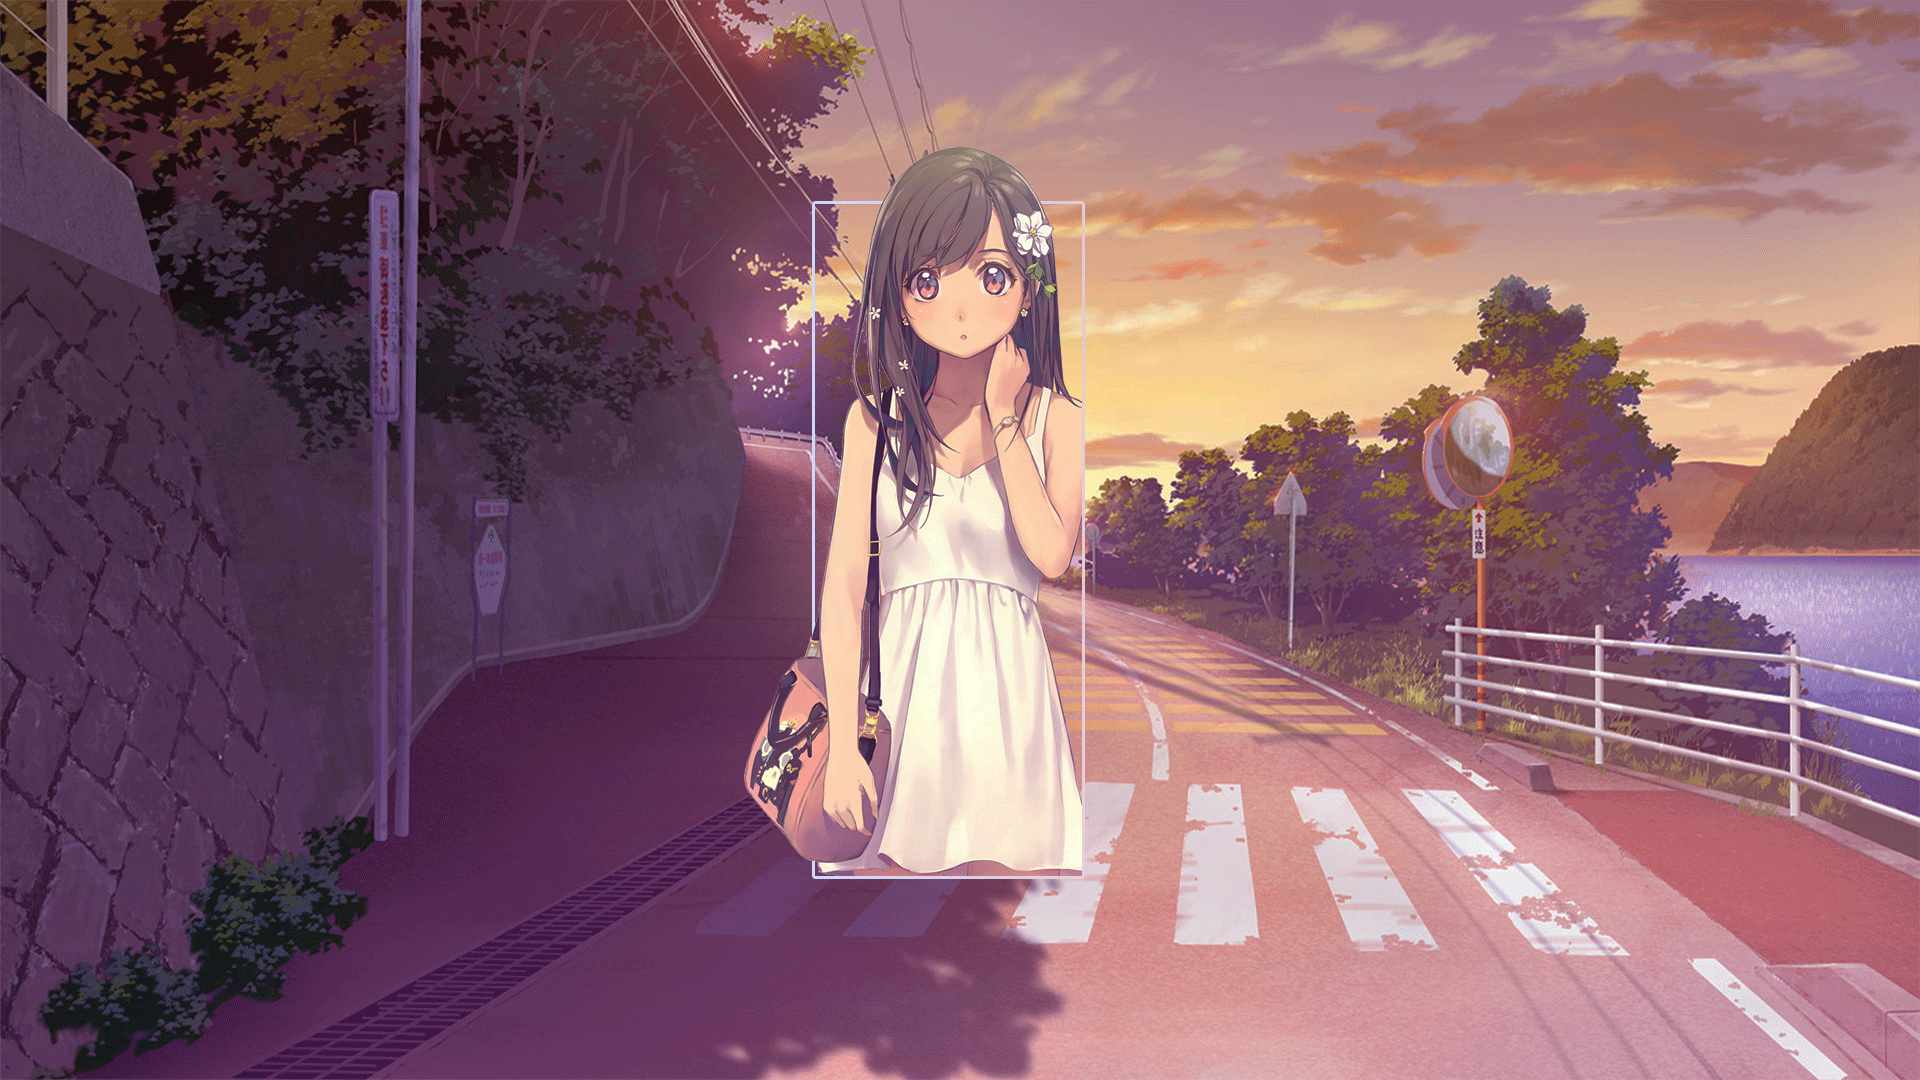 Anime 1920x1080 anime anime girls street afternoon road digital art picture-in-picture trees sun dress brunette